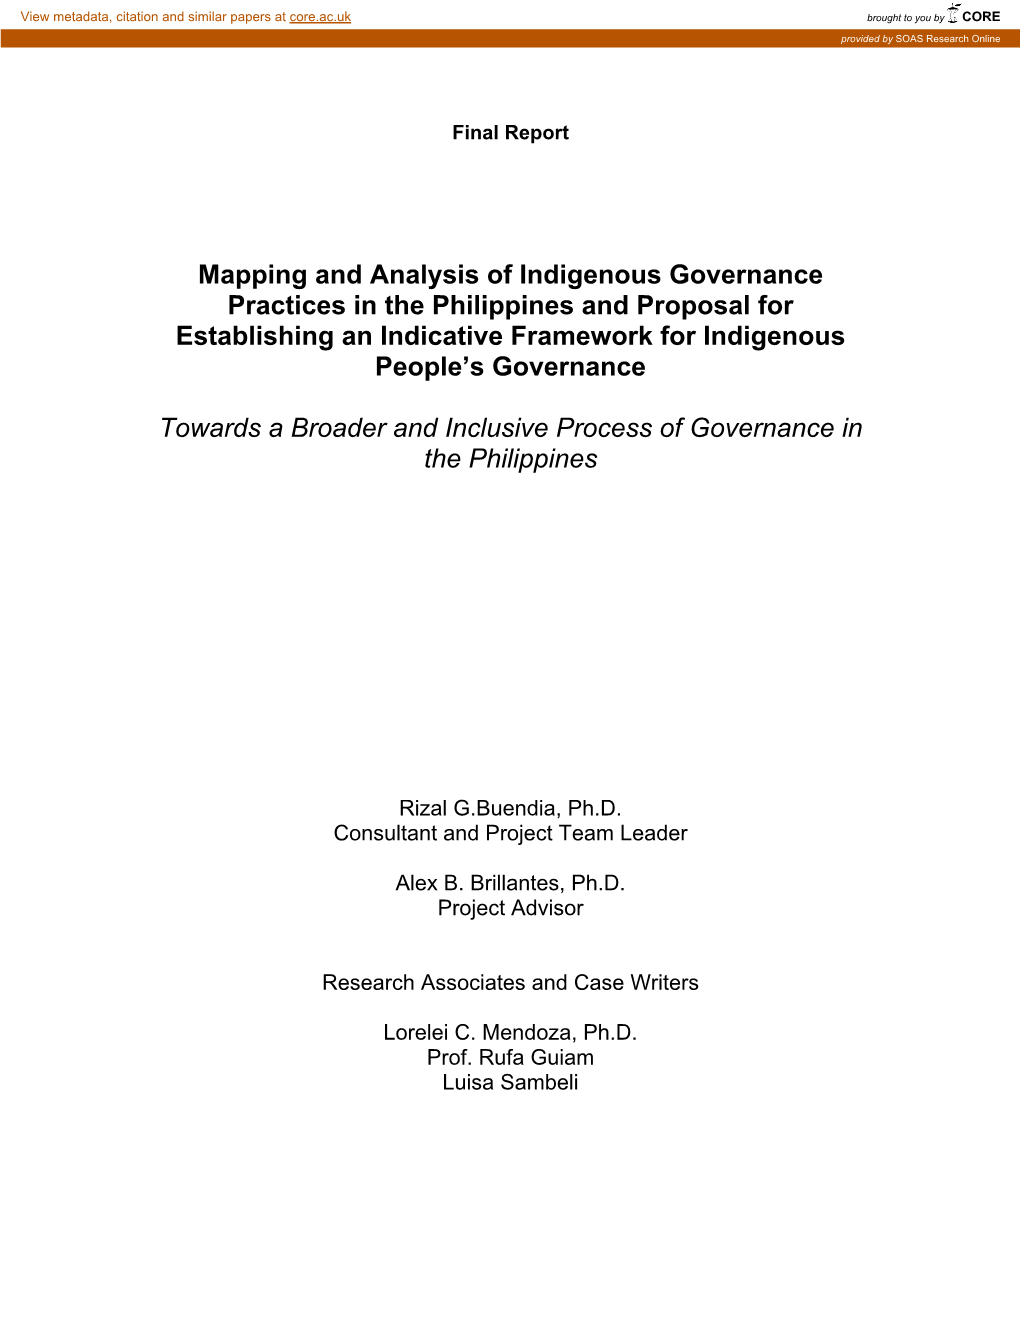 Mapping and Analysis of Indigenous Governance Practices in the Philippines and Proposal for Establishing an Indicative Framework for Indigenous People’S Governance